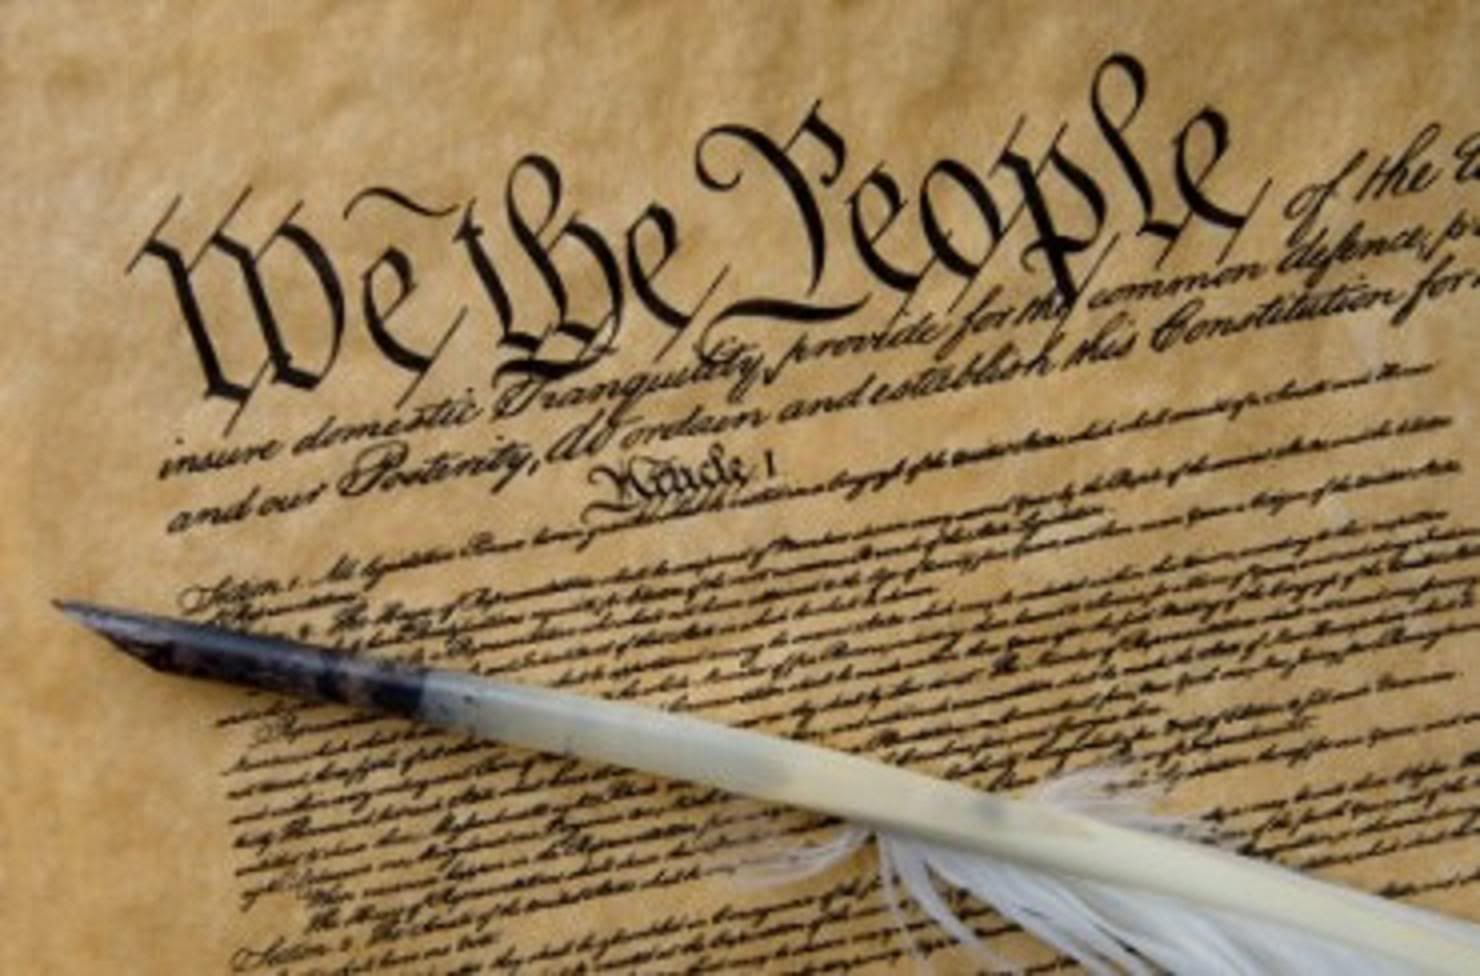 We The Peopl - US Constitution